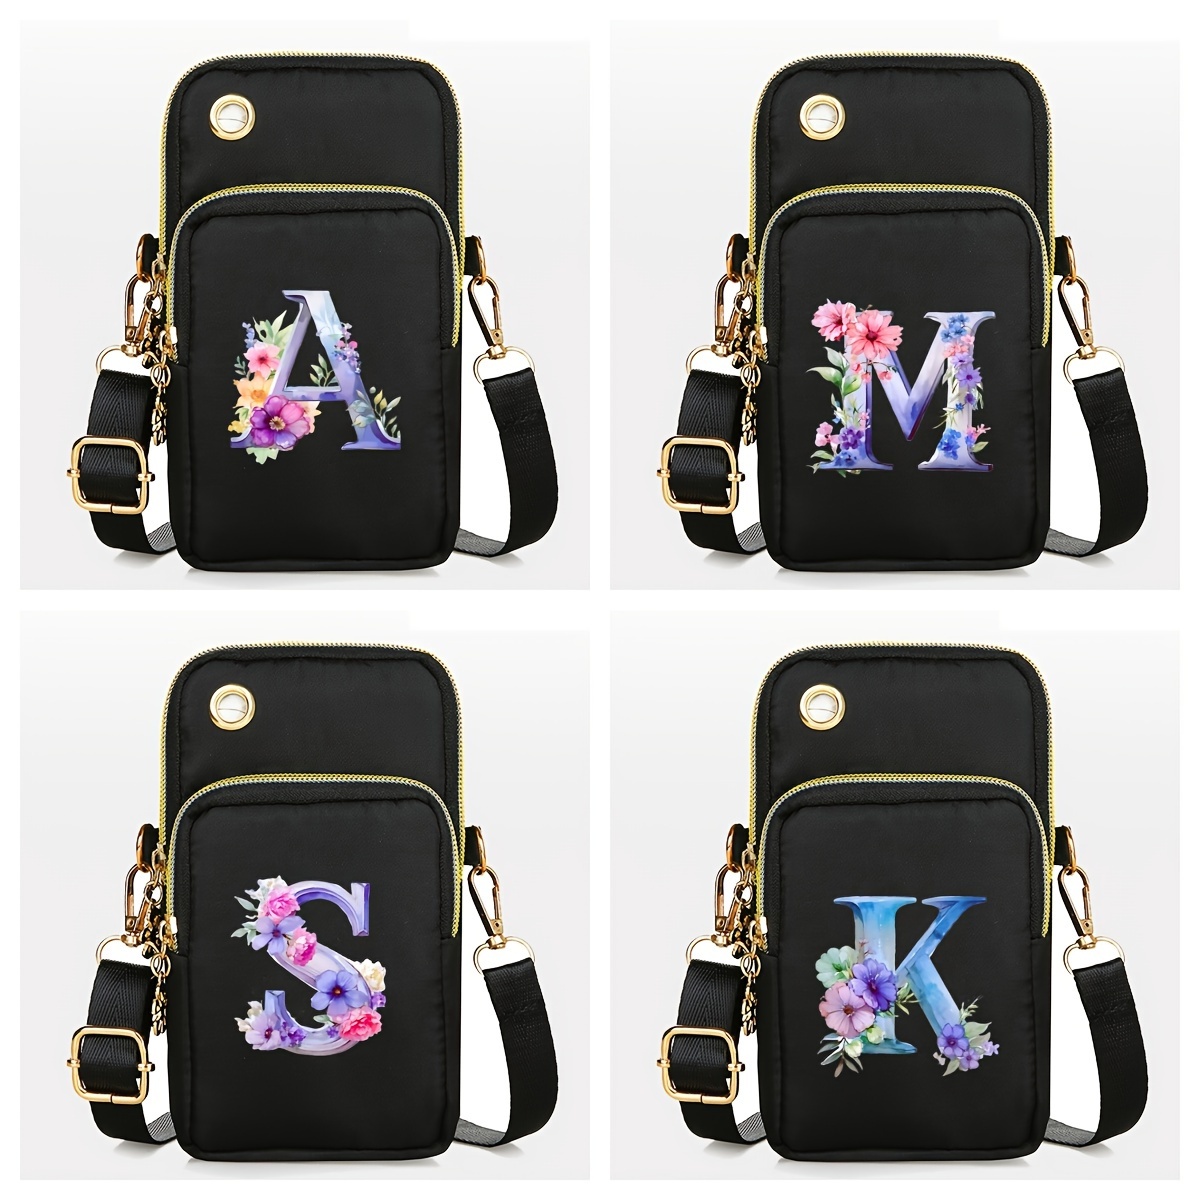 

Mini Personalized Floral Alphabet Nylon Phone Bag With Detachable Strap, Coin Purse, Sporty Style Crossbody Pouch For Casual And Outdoor Activities